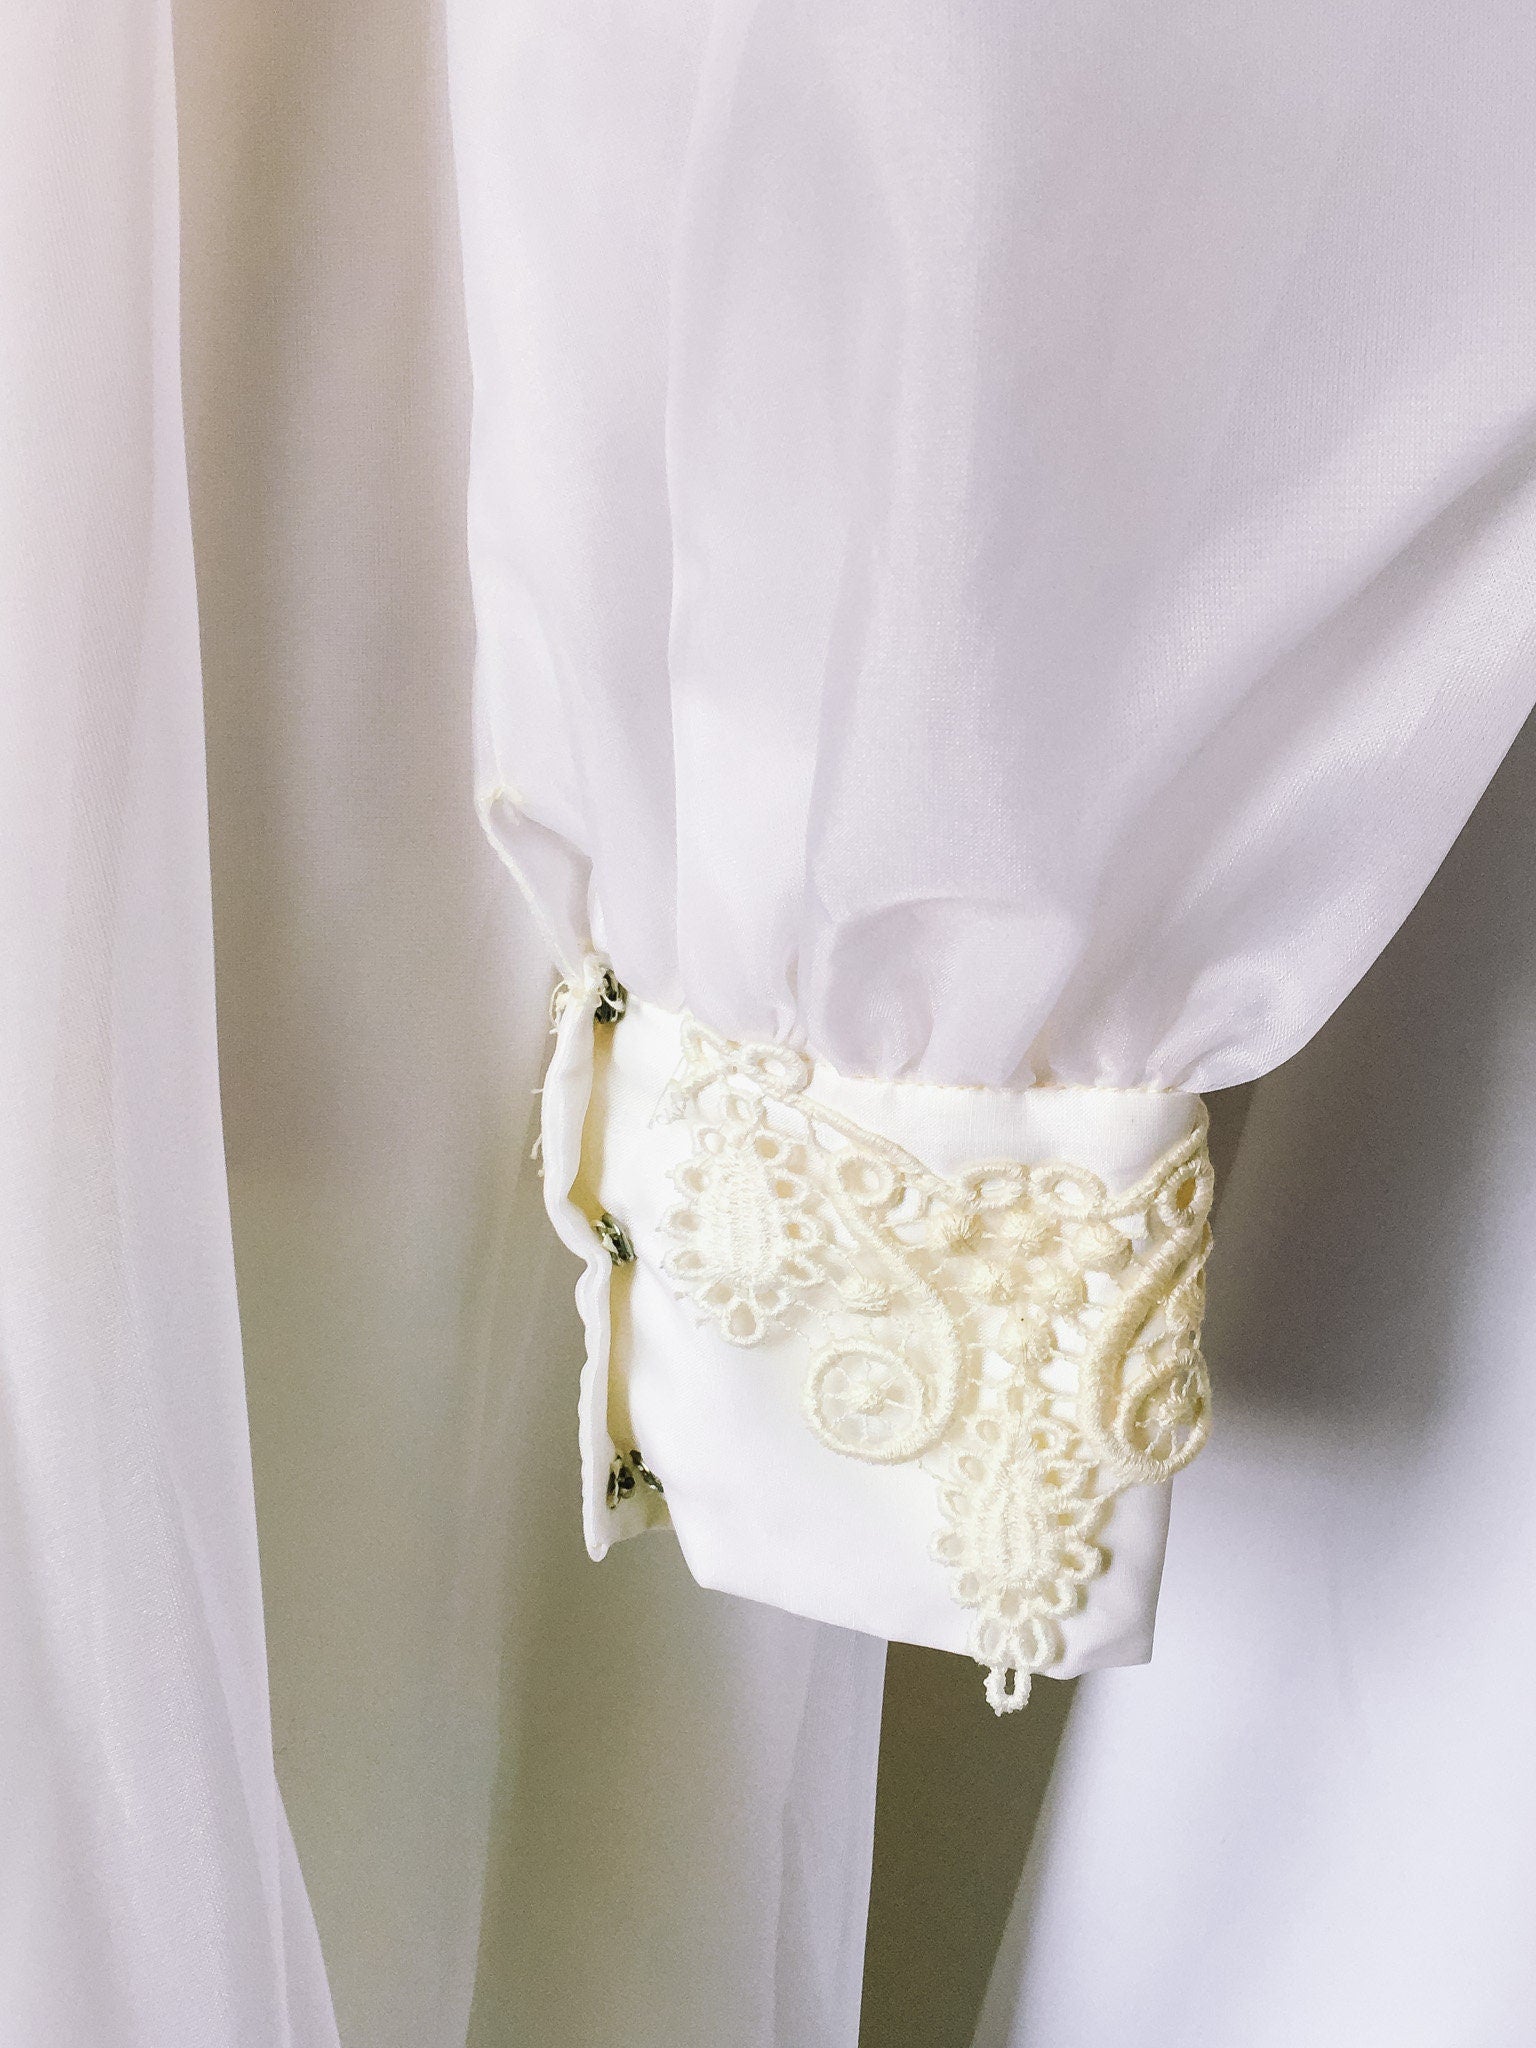 Vintage Long-sleeved Collared Wedding Dress with Cream Lace Detailing